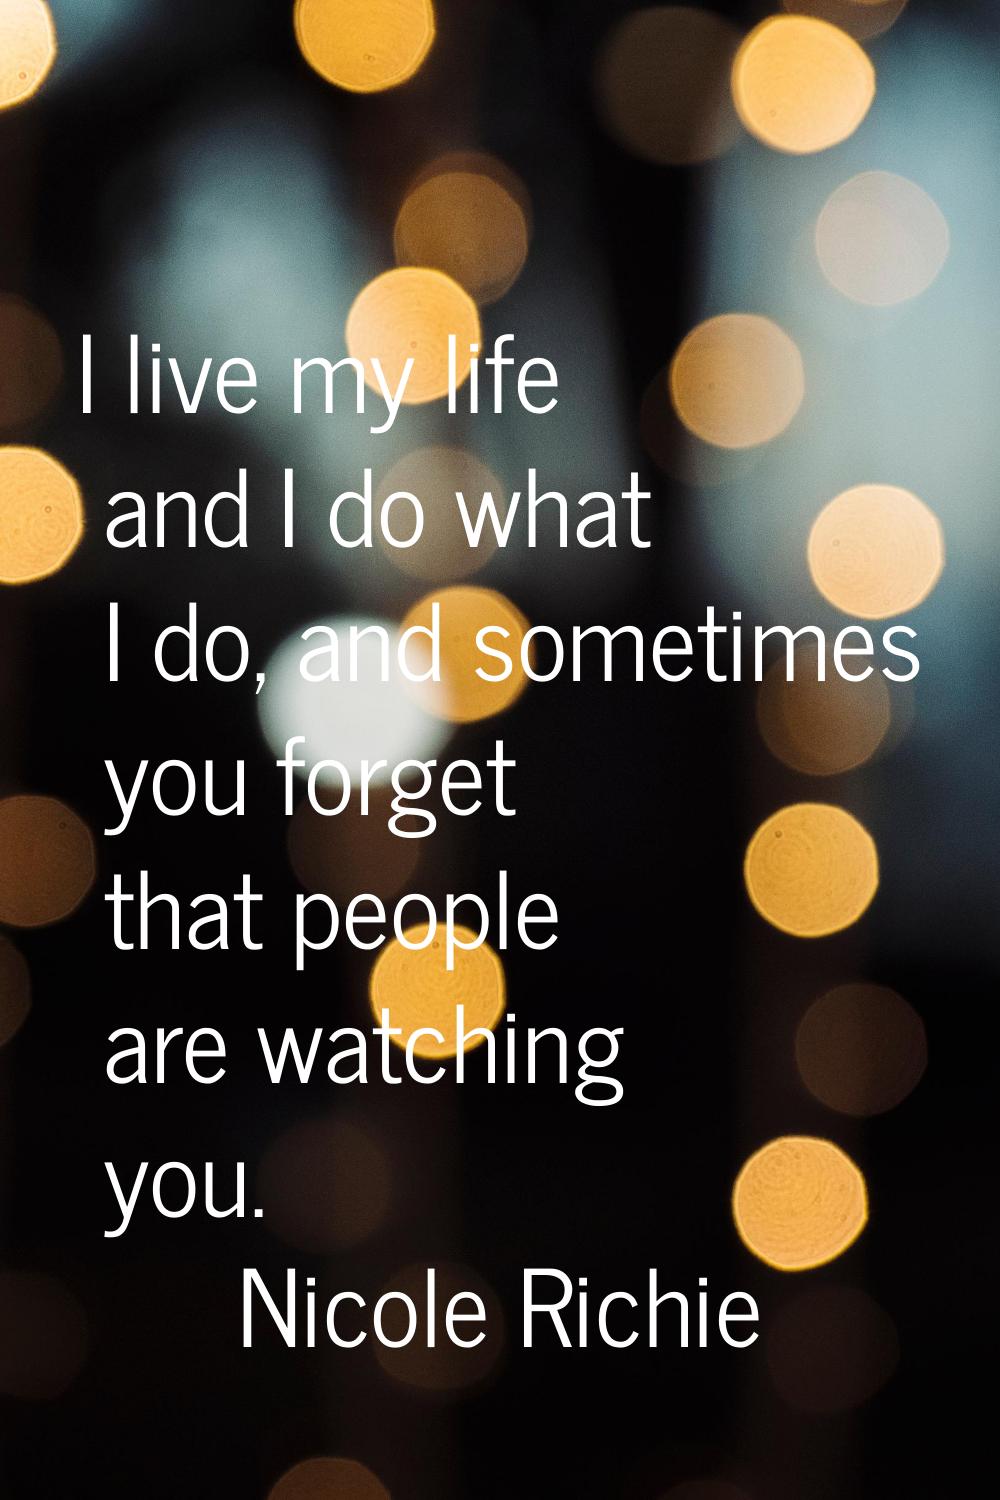 I live my life and I do what I do, and sometimes you forget that people are watching you.